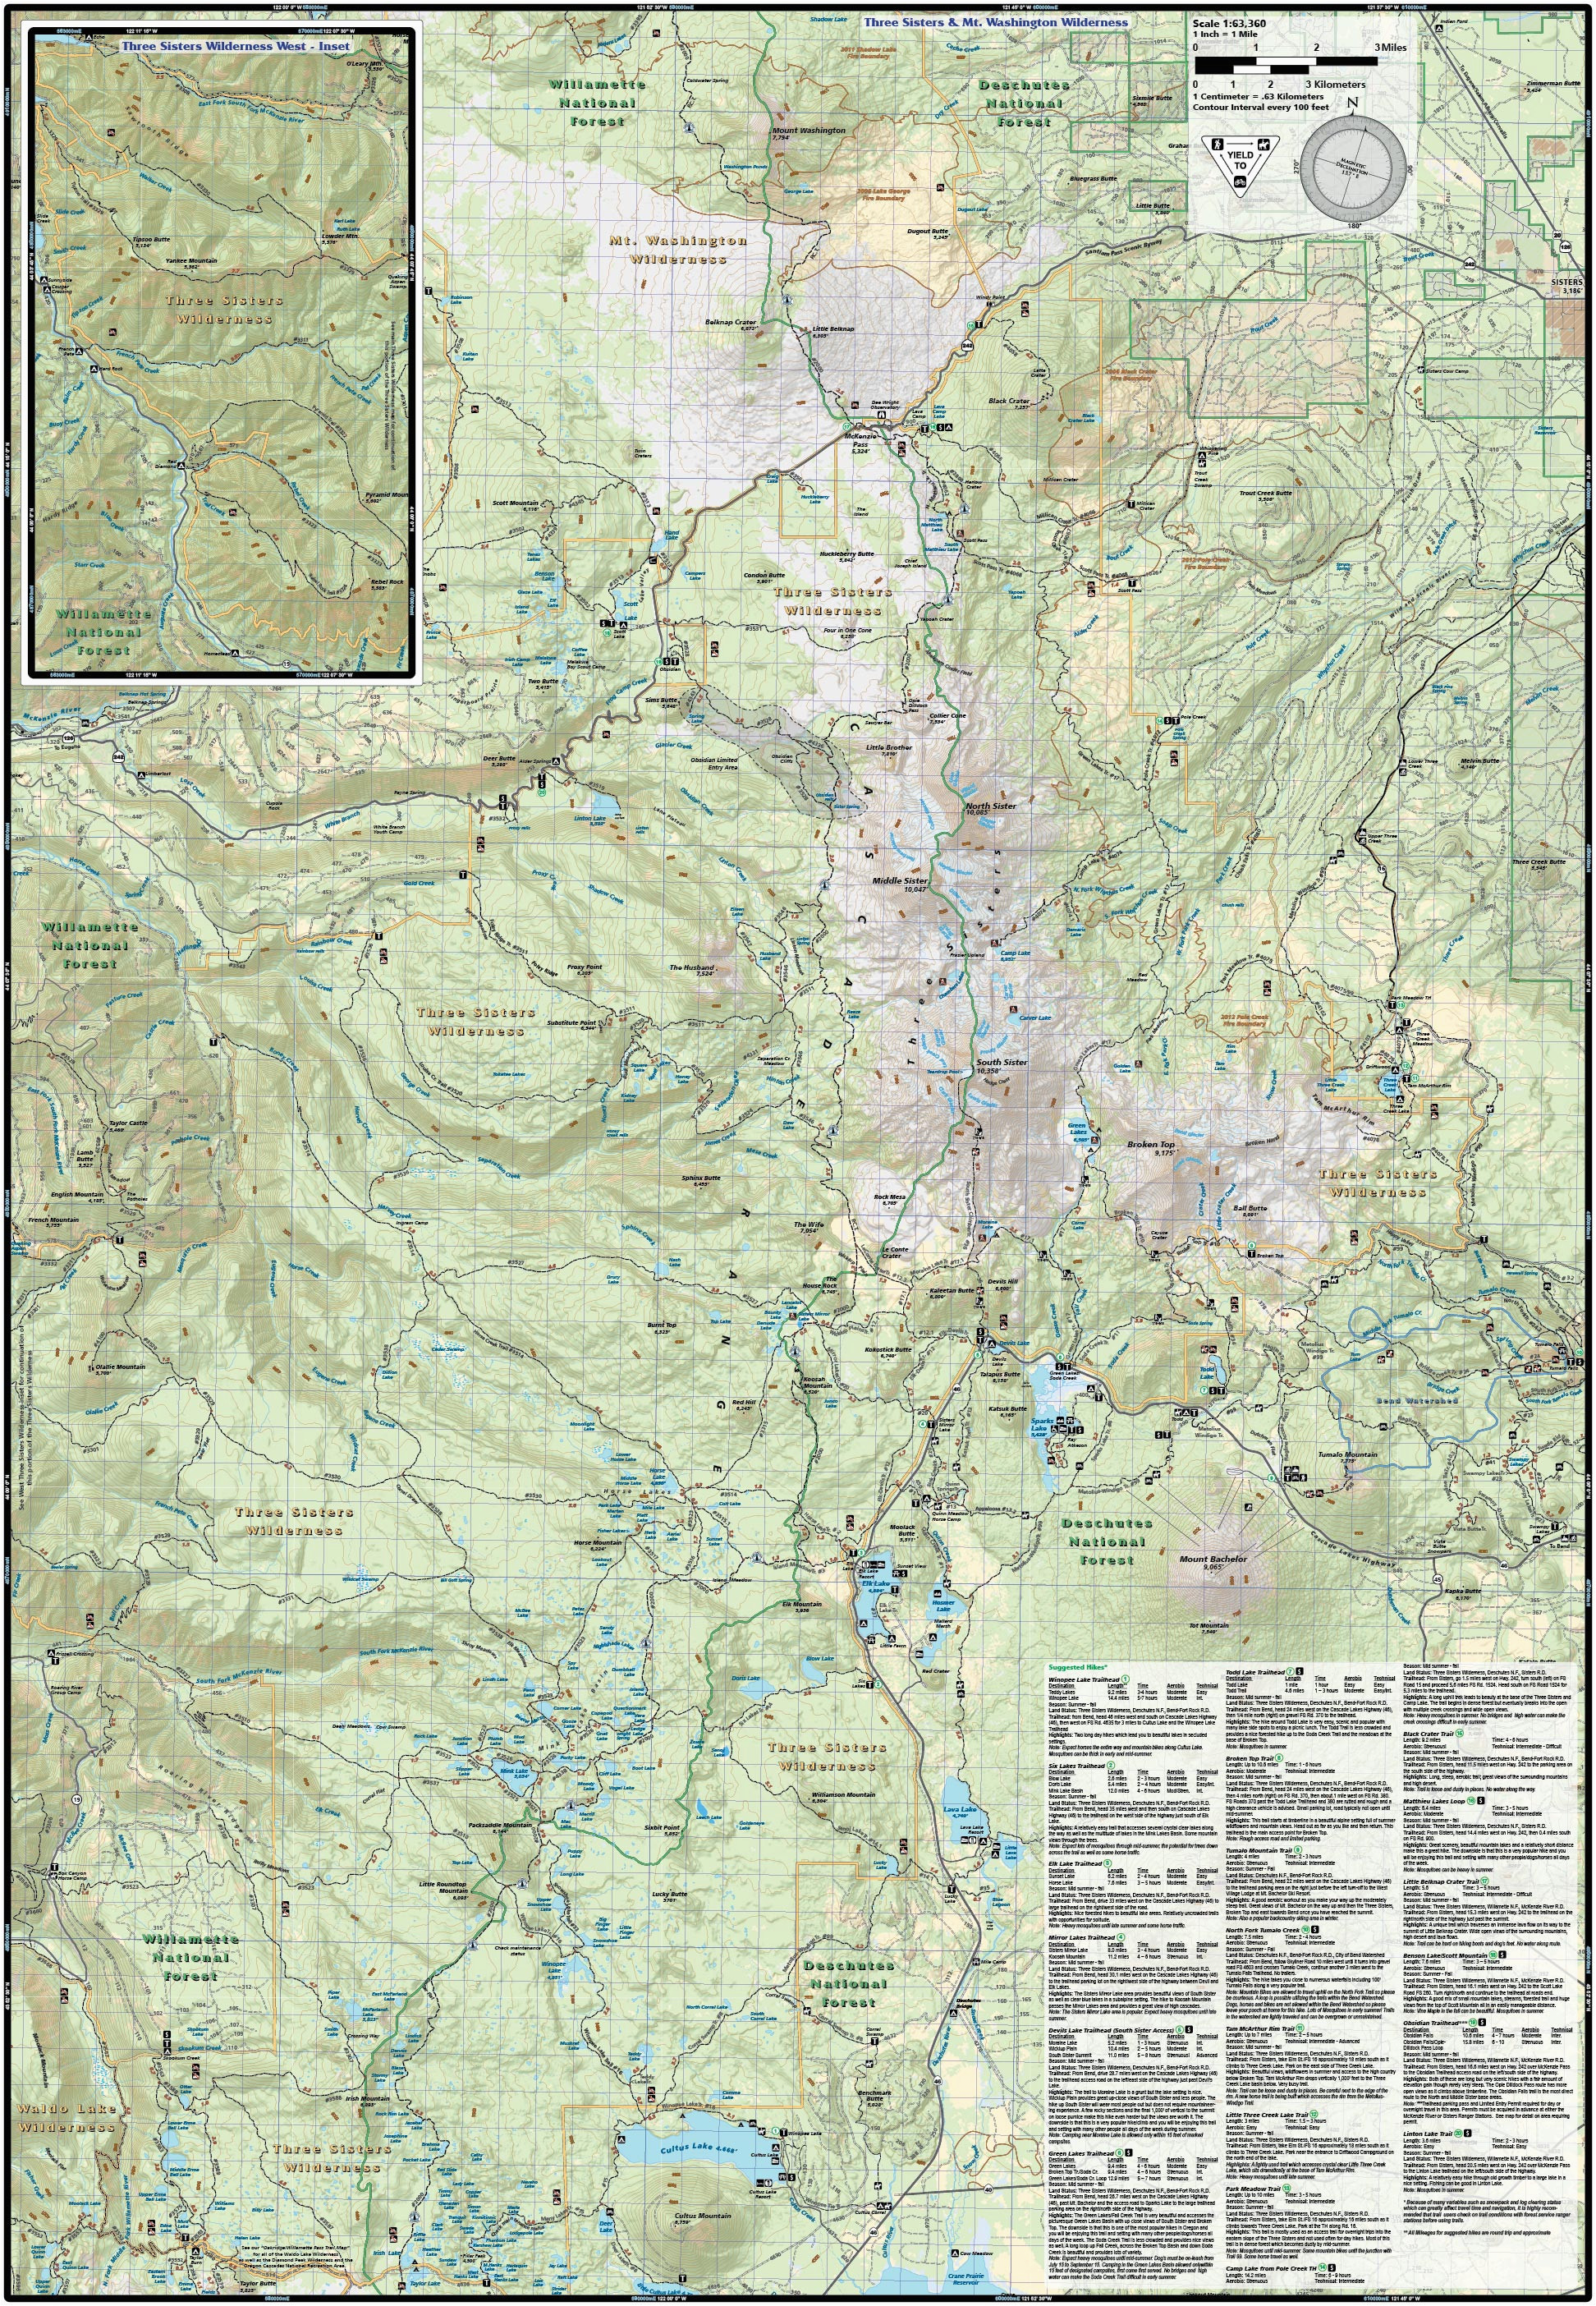 three sisters wilderness map adventure maps